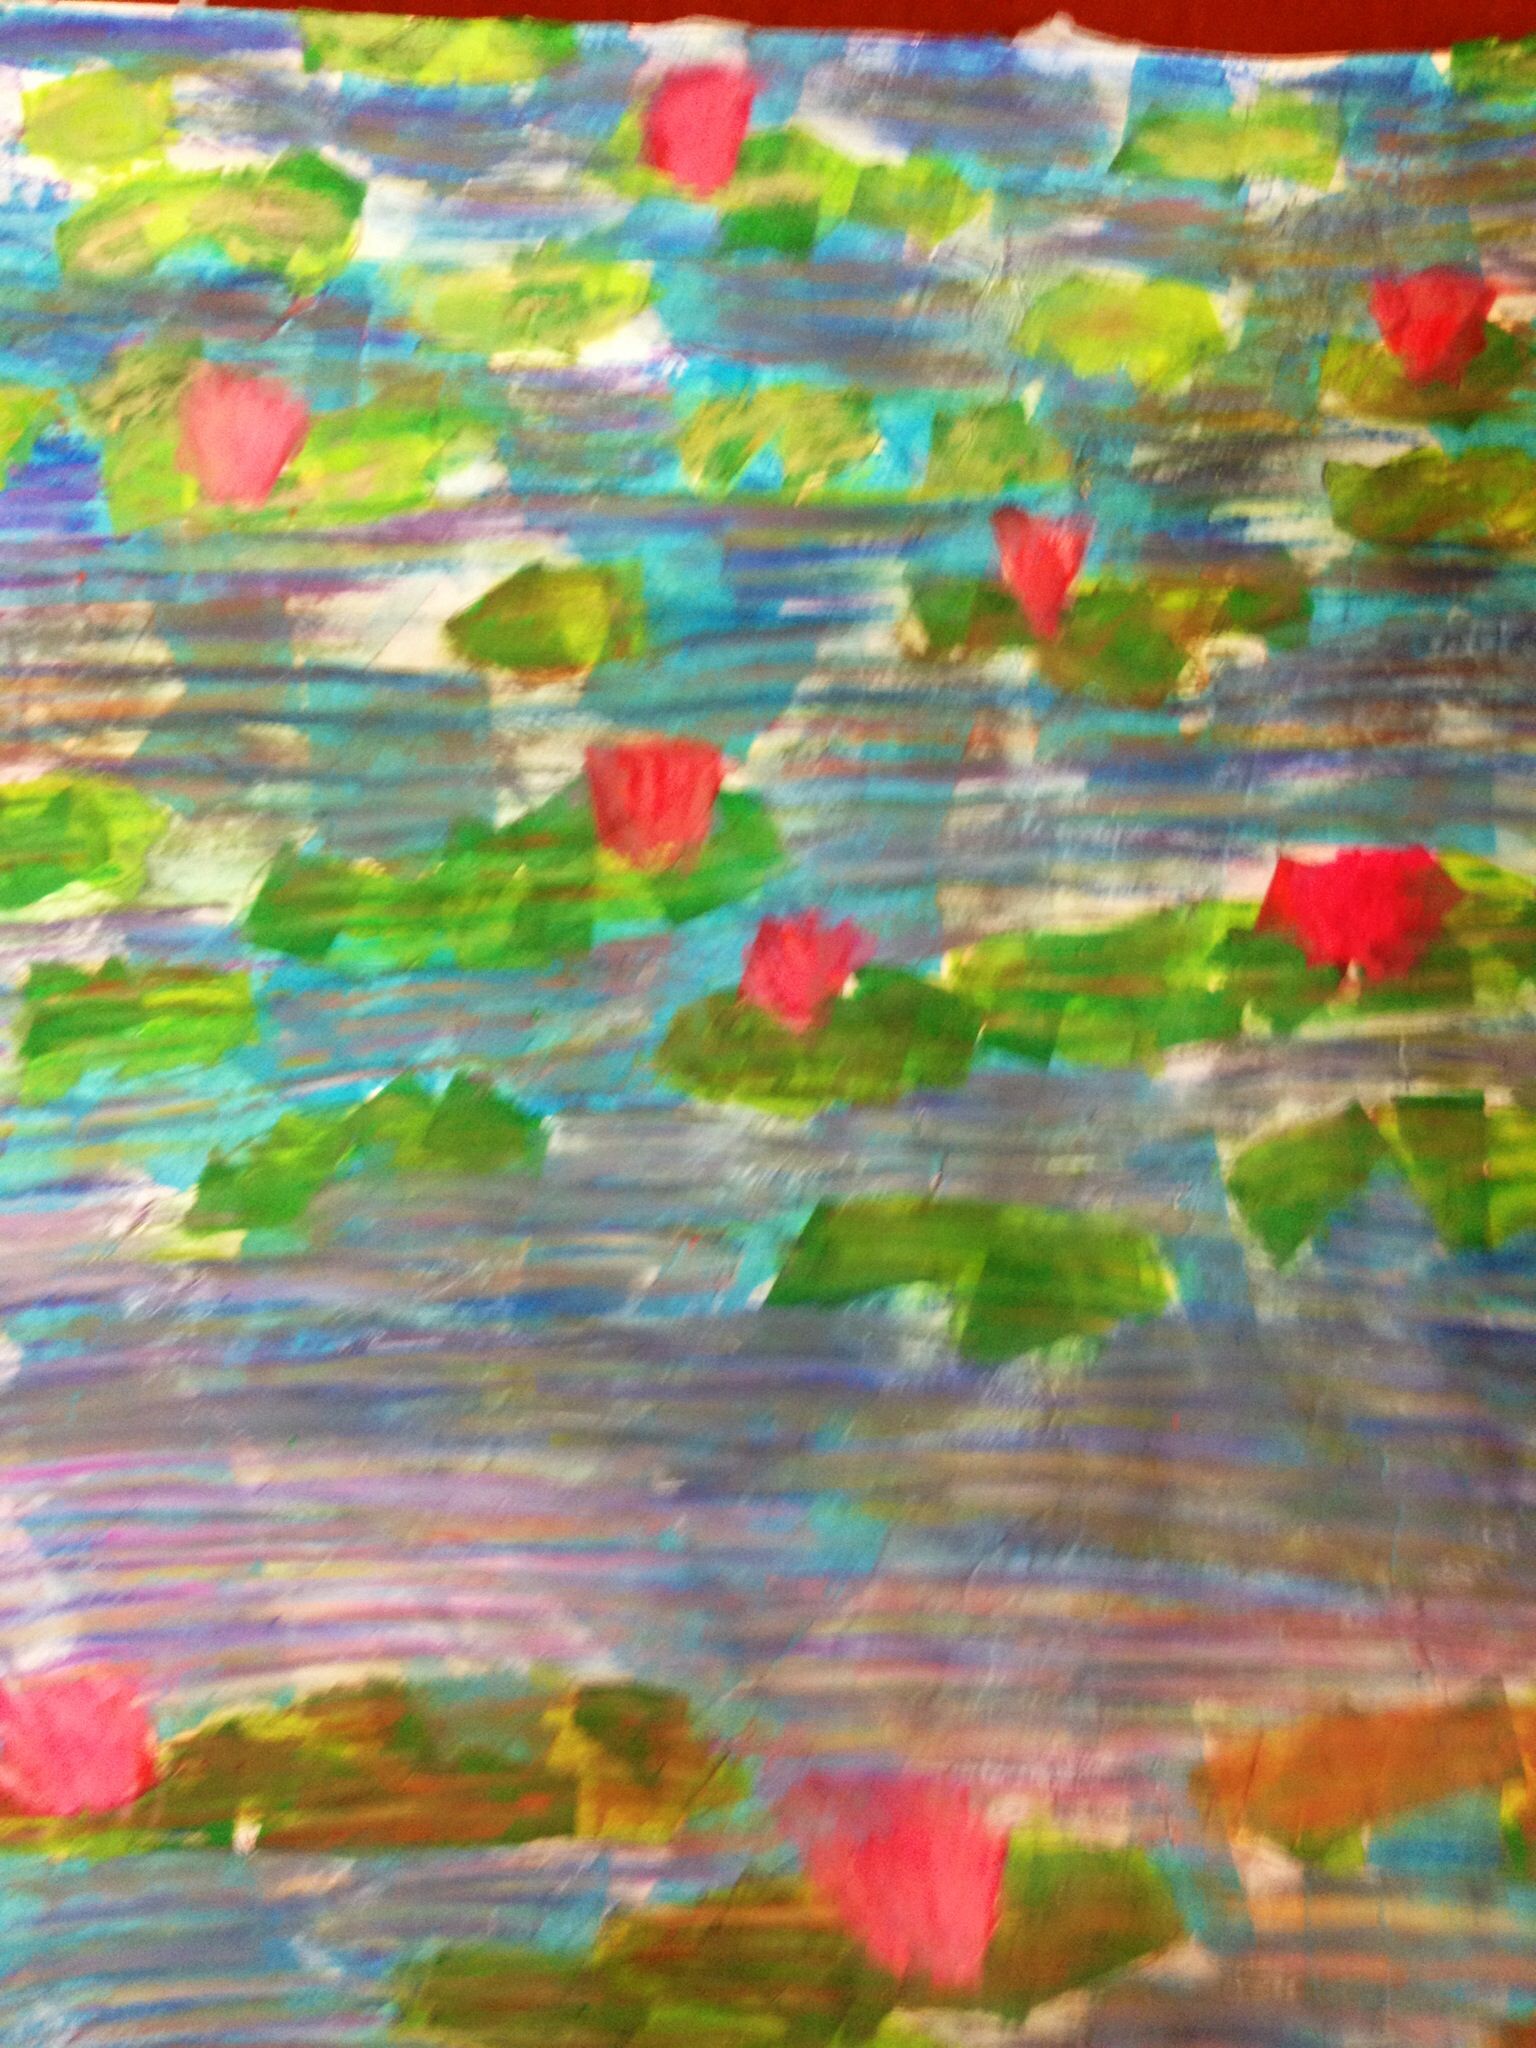 7th grade Monet inspired water lily collage | Projects by my student ...